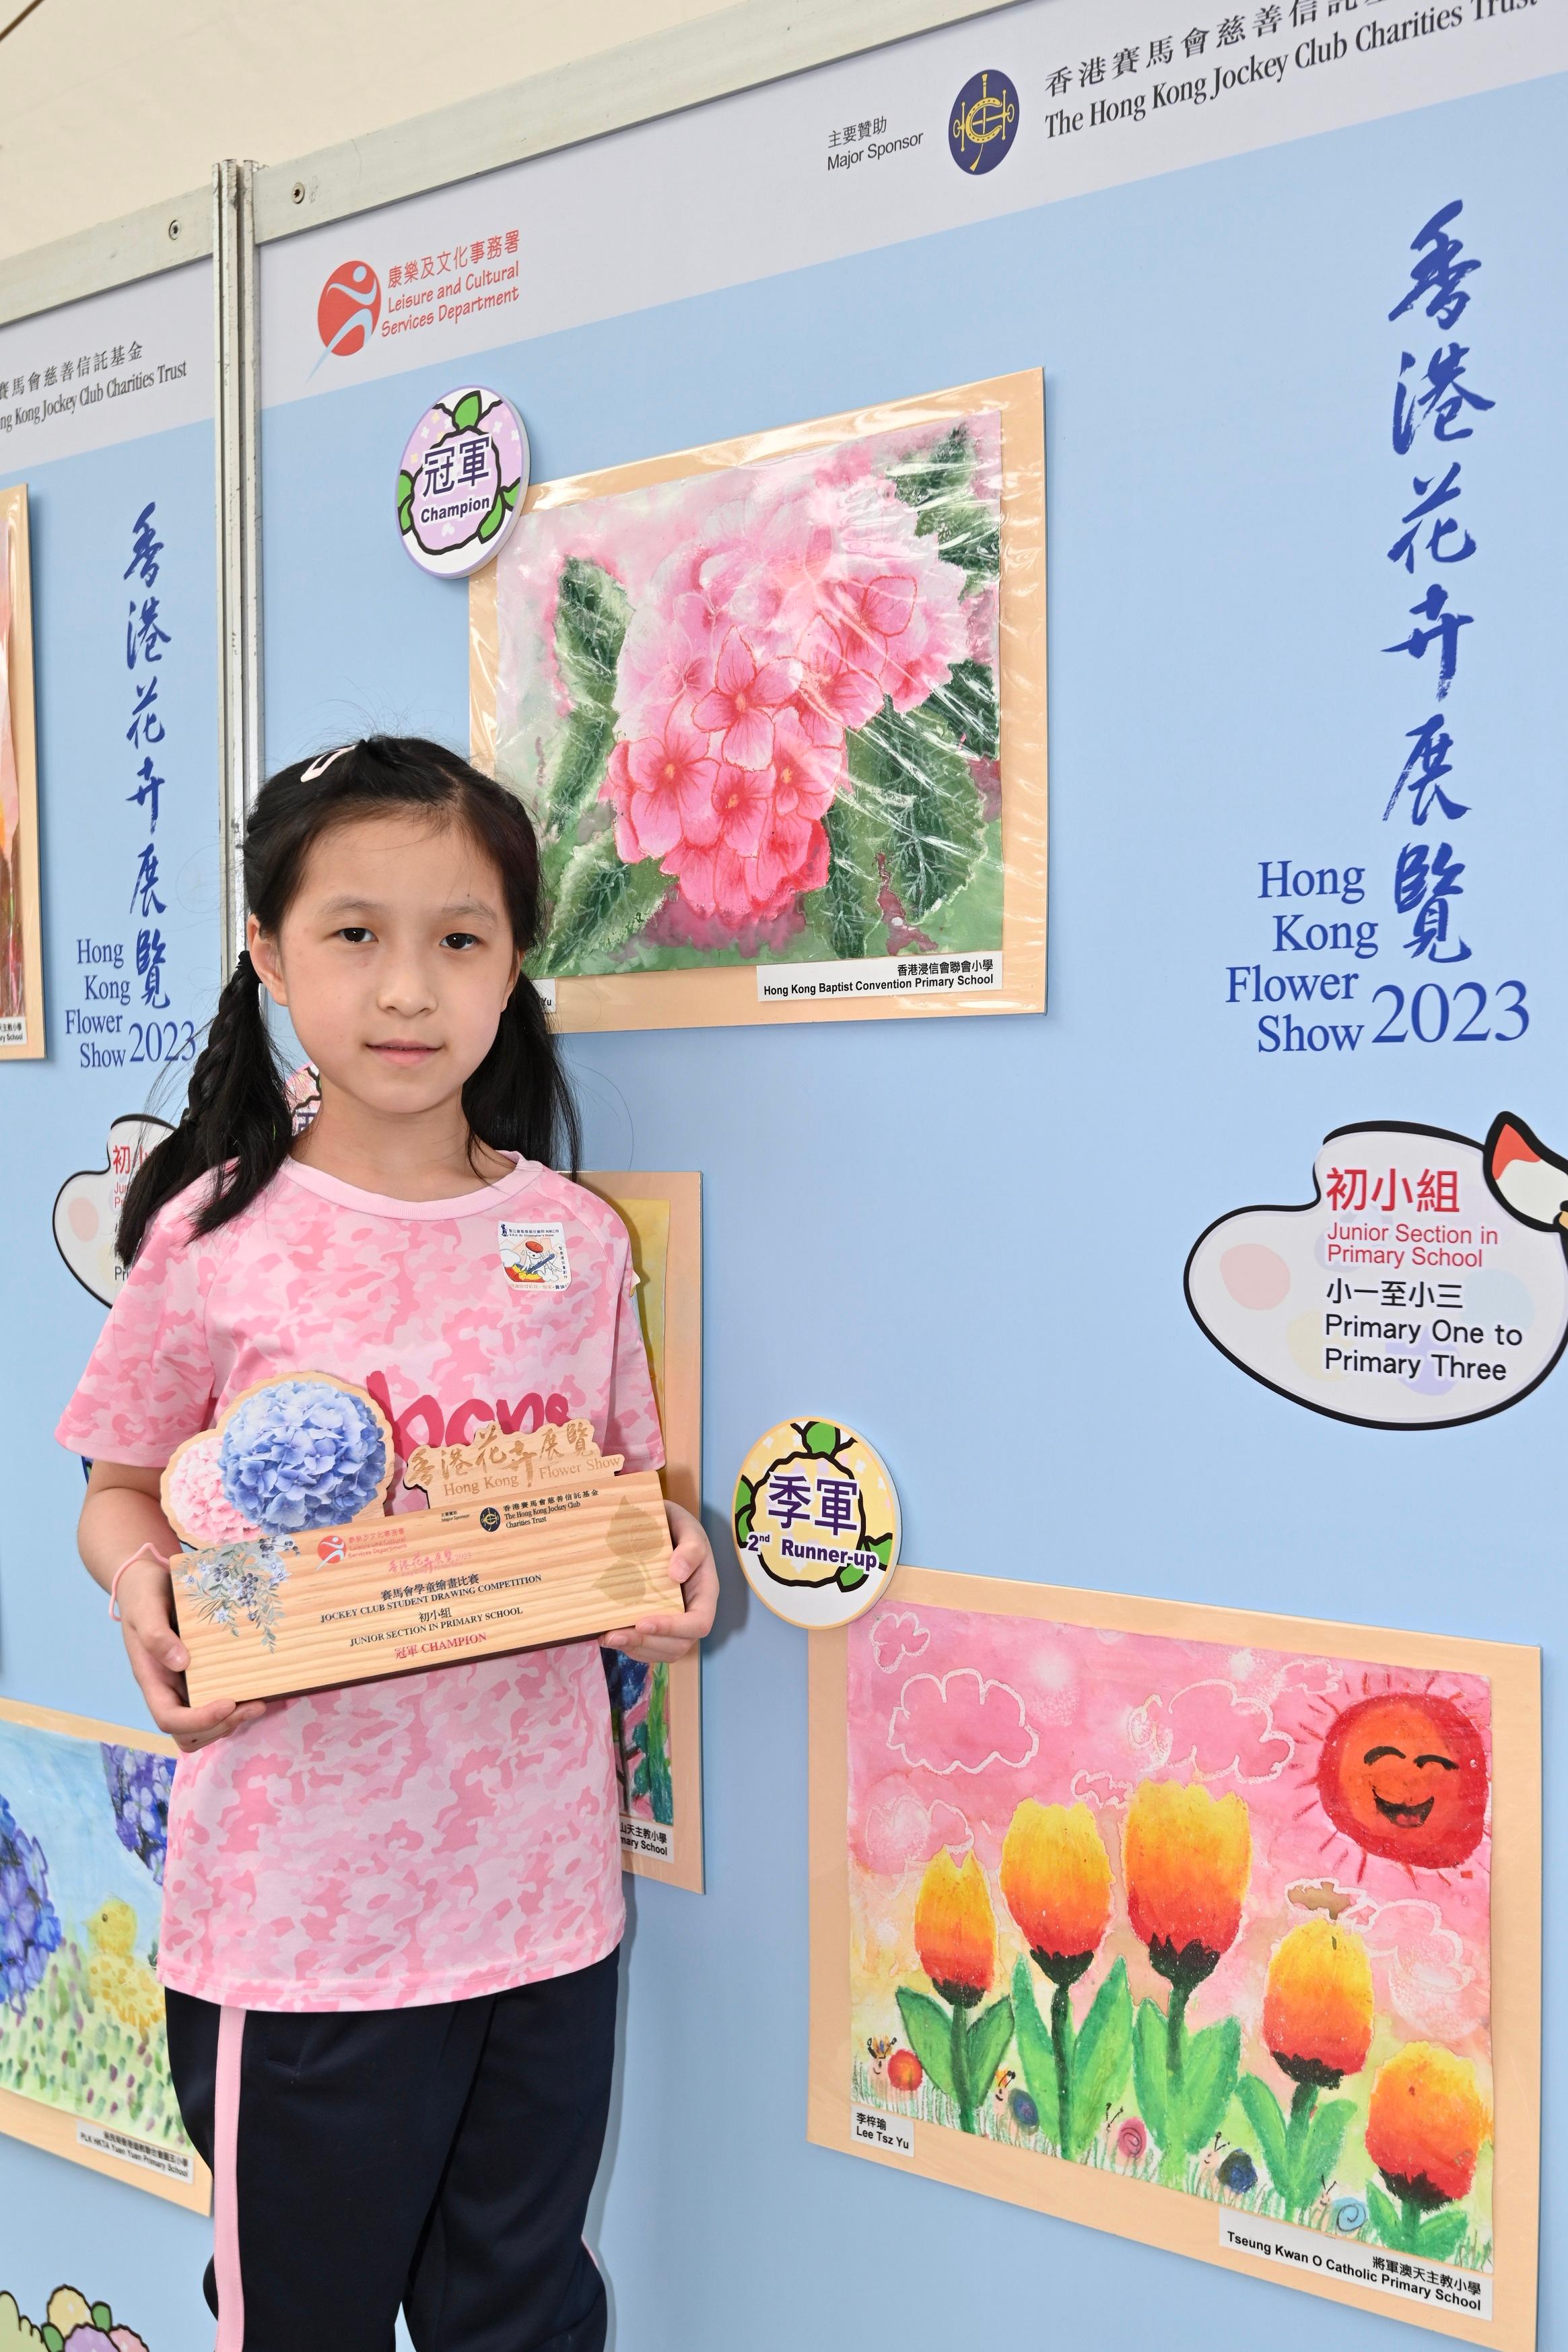 The Hong Kong Flower Show at Victoria Park will close at 9pm tomorrow (March 19). During the flower show period, various recreational fringe activities have been held at the showground. One of these activities, the Jockey Club Student Drawing Competition, held its prize presentation ceremony today (March 18) and winning entries are now on display at the showground. Photo shows the champion of the Junior Section in Primary School, Chan Sze-yu, and her winning entry.